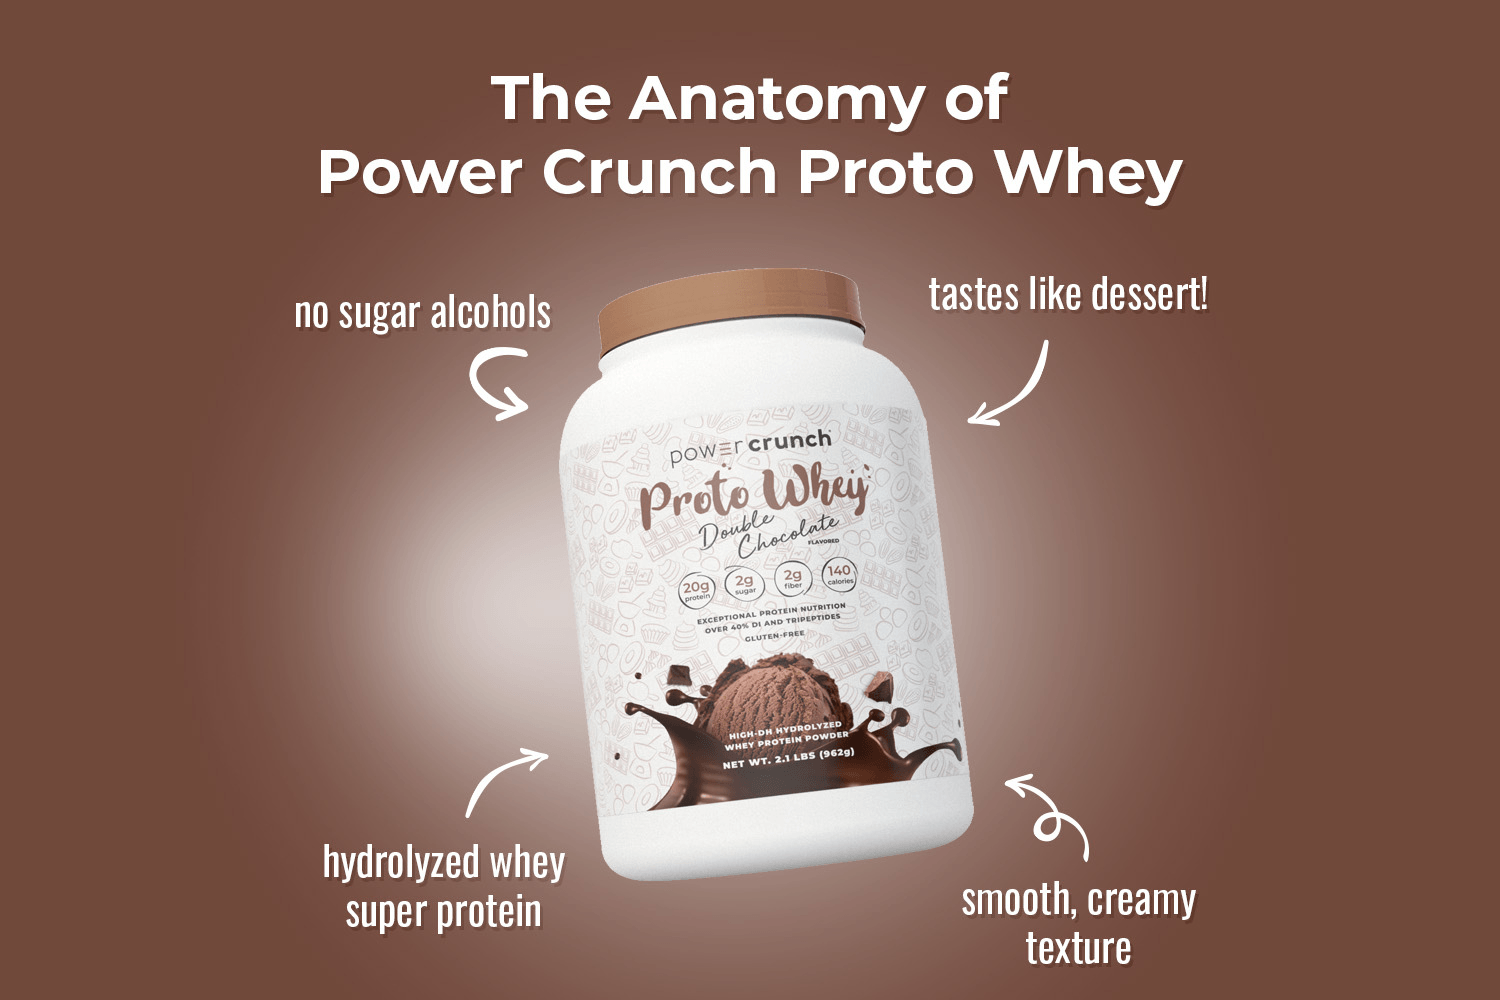 chocolate protein powder with hydrolyzed whey protein, no sugar alcohols, and smooth creamy texture